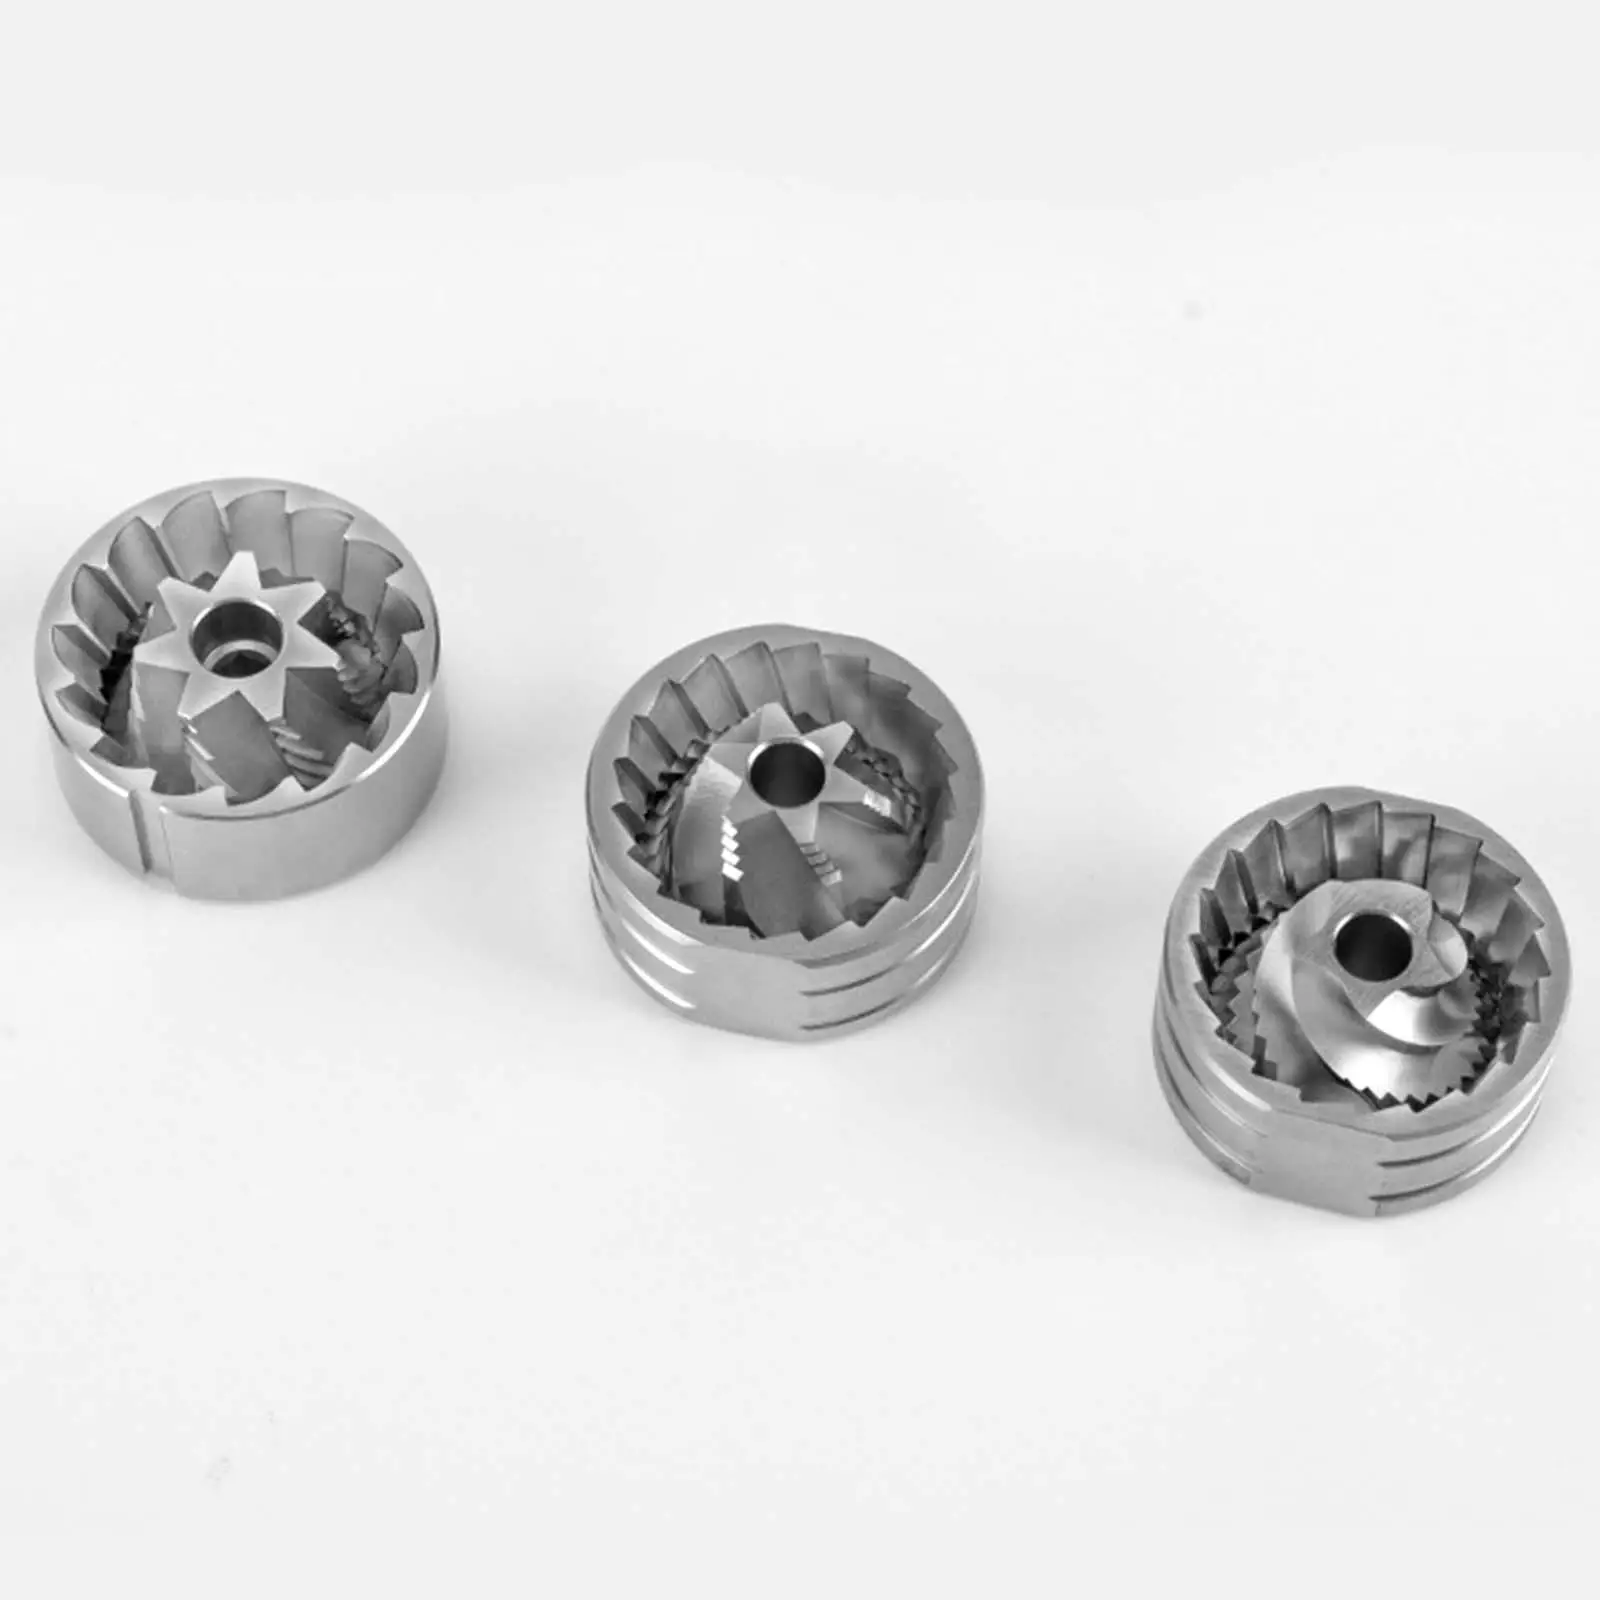 Stainless Steel Round Burr Replacement High Milling Espresso Machine Parts Professional Coffee Accesory Manual Coffee Mill Burrs